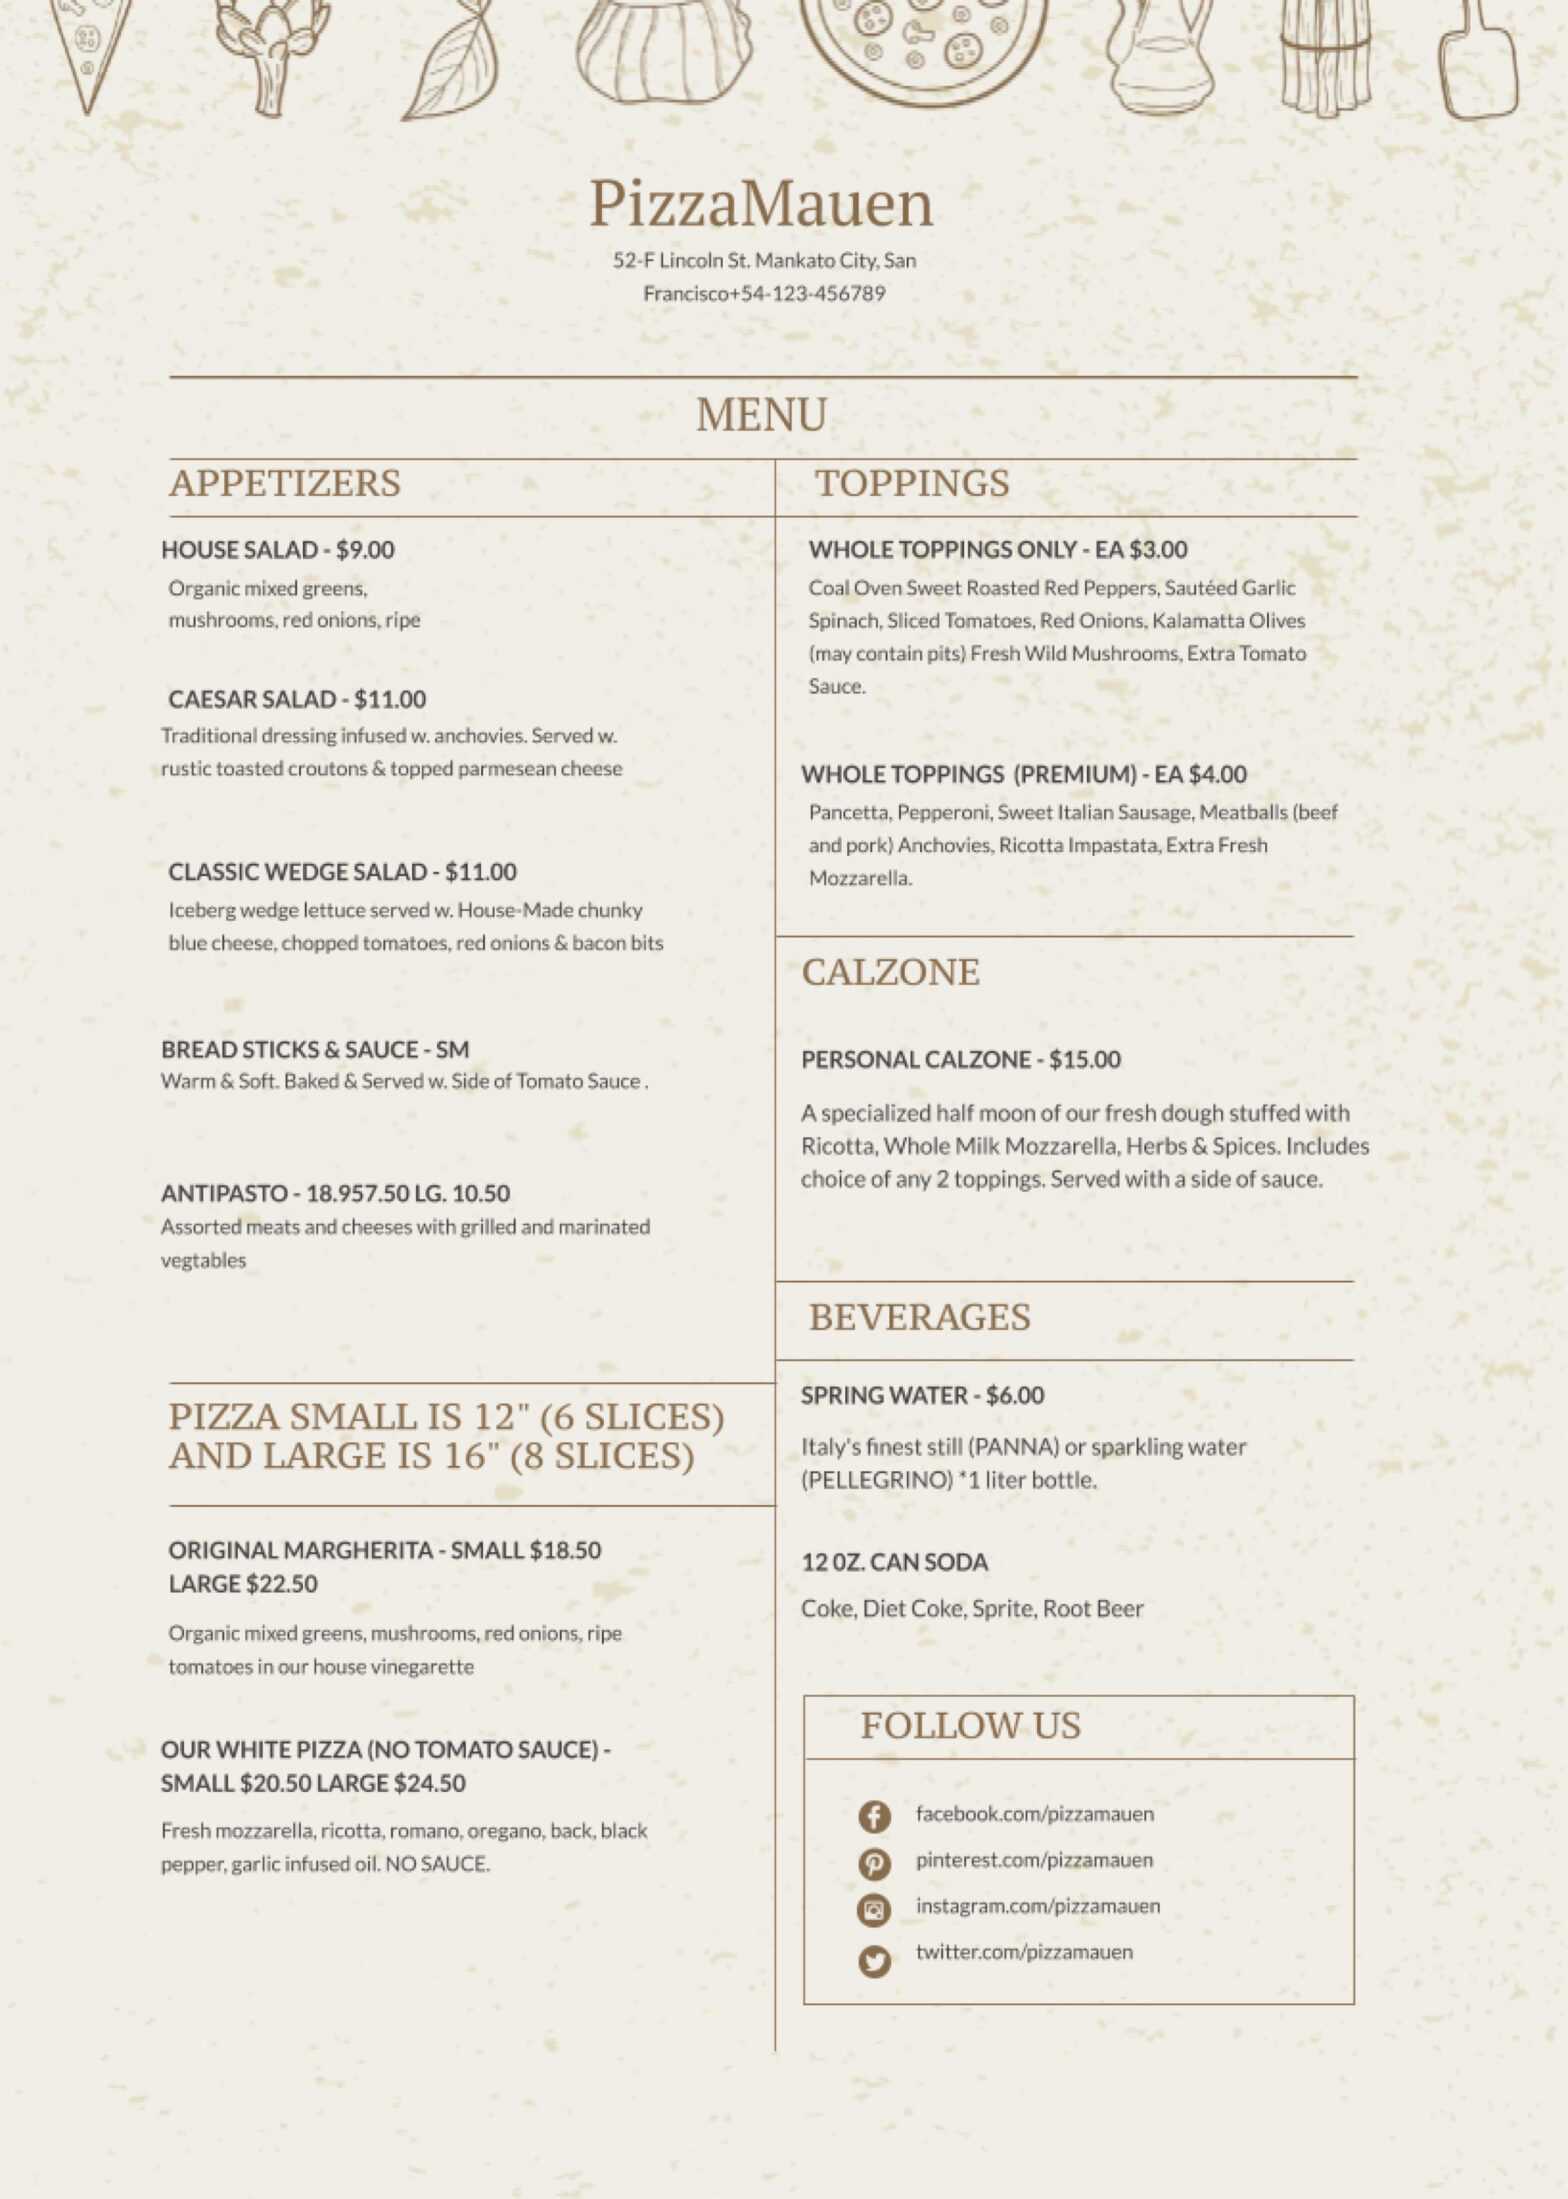 32 Free Simple Menu Templates For Restaurants, Cafes, And inside Editable Menu Templates Free